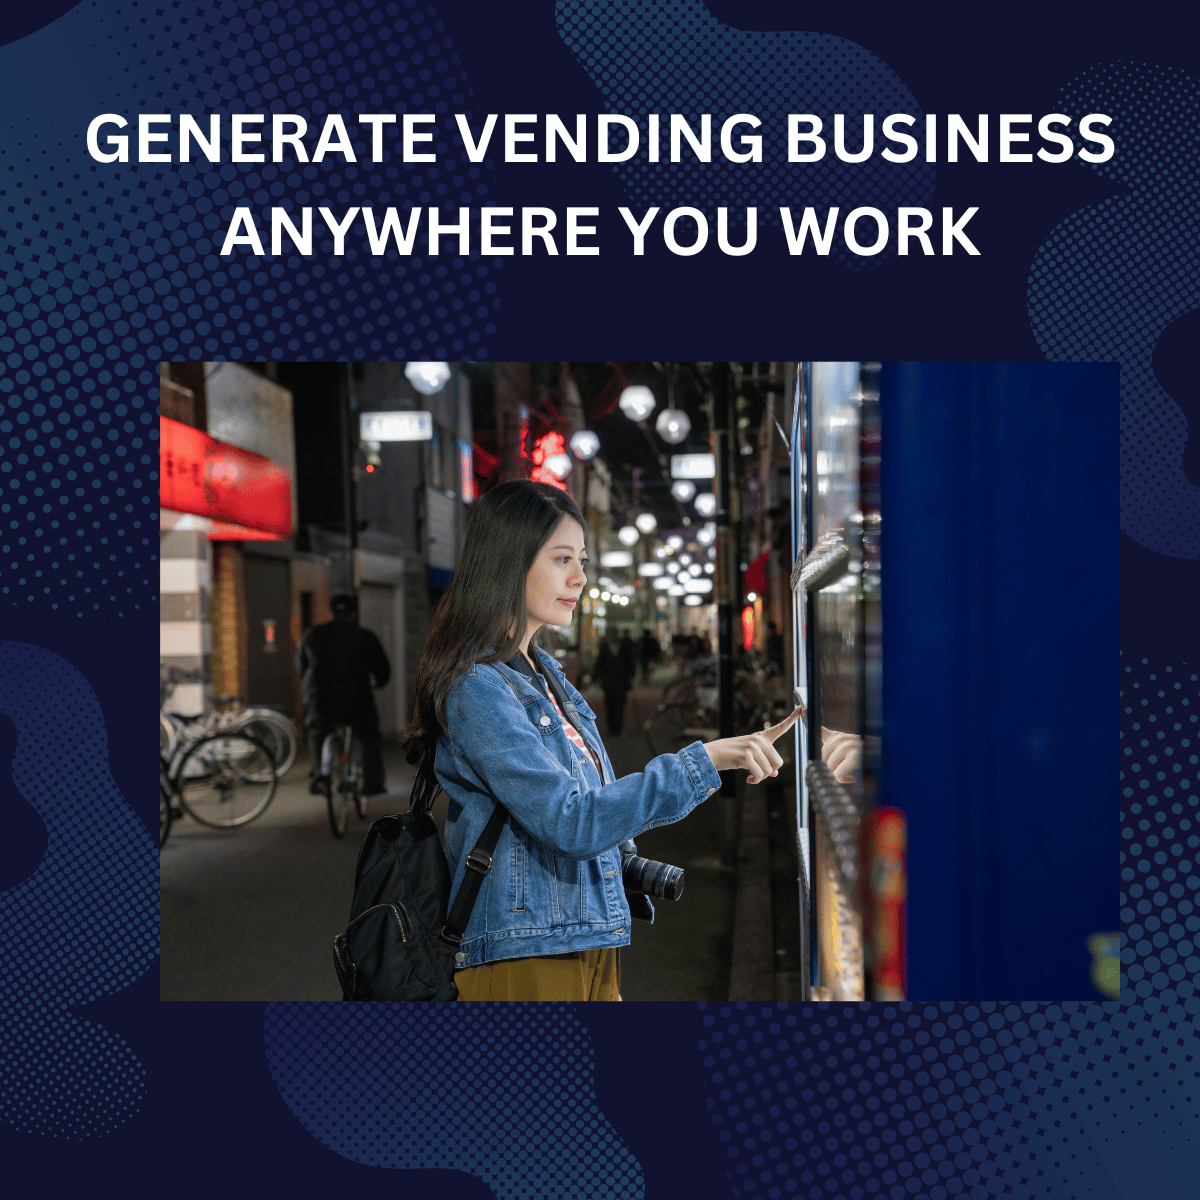 GENERATE VENDING BUSINESS ANYWHERE YOU WORK